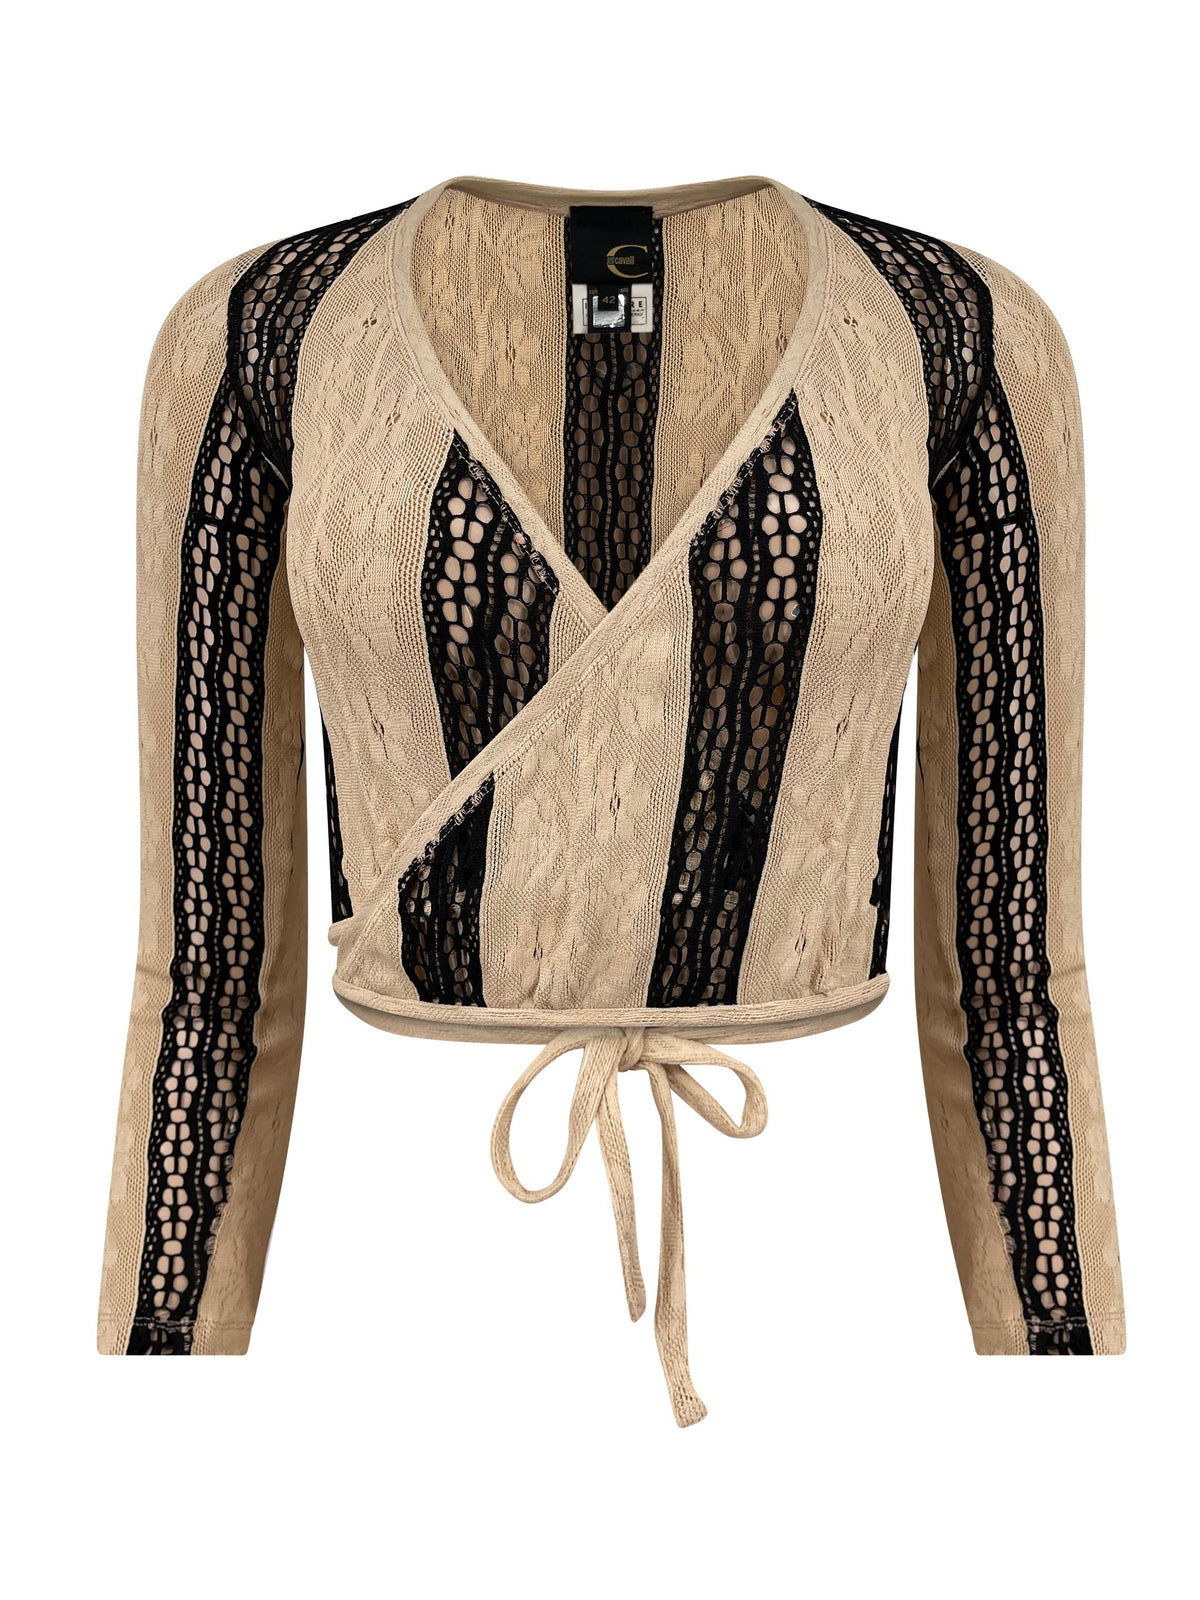 Roberto Cavalli Just Cavalli 2000's Lace Wrap Cardigan - ONFEMME By Lindsey's Kloset